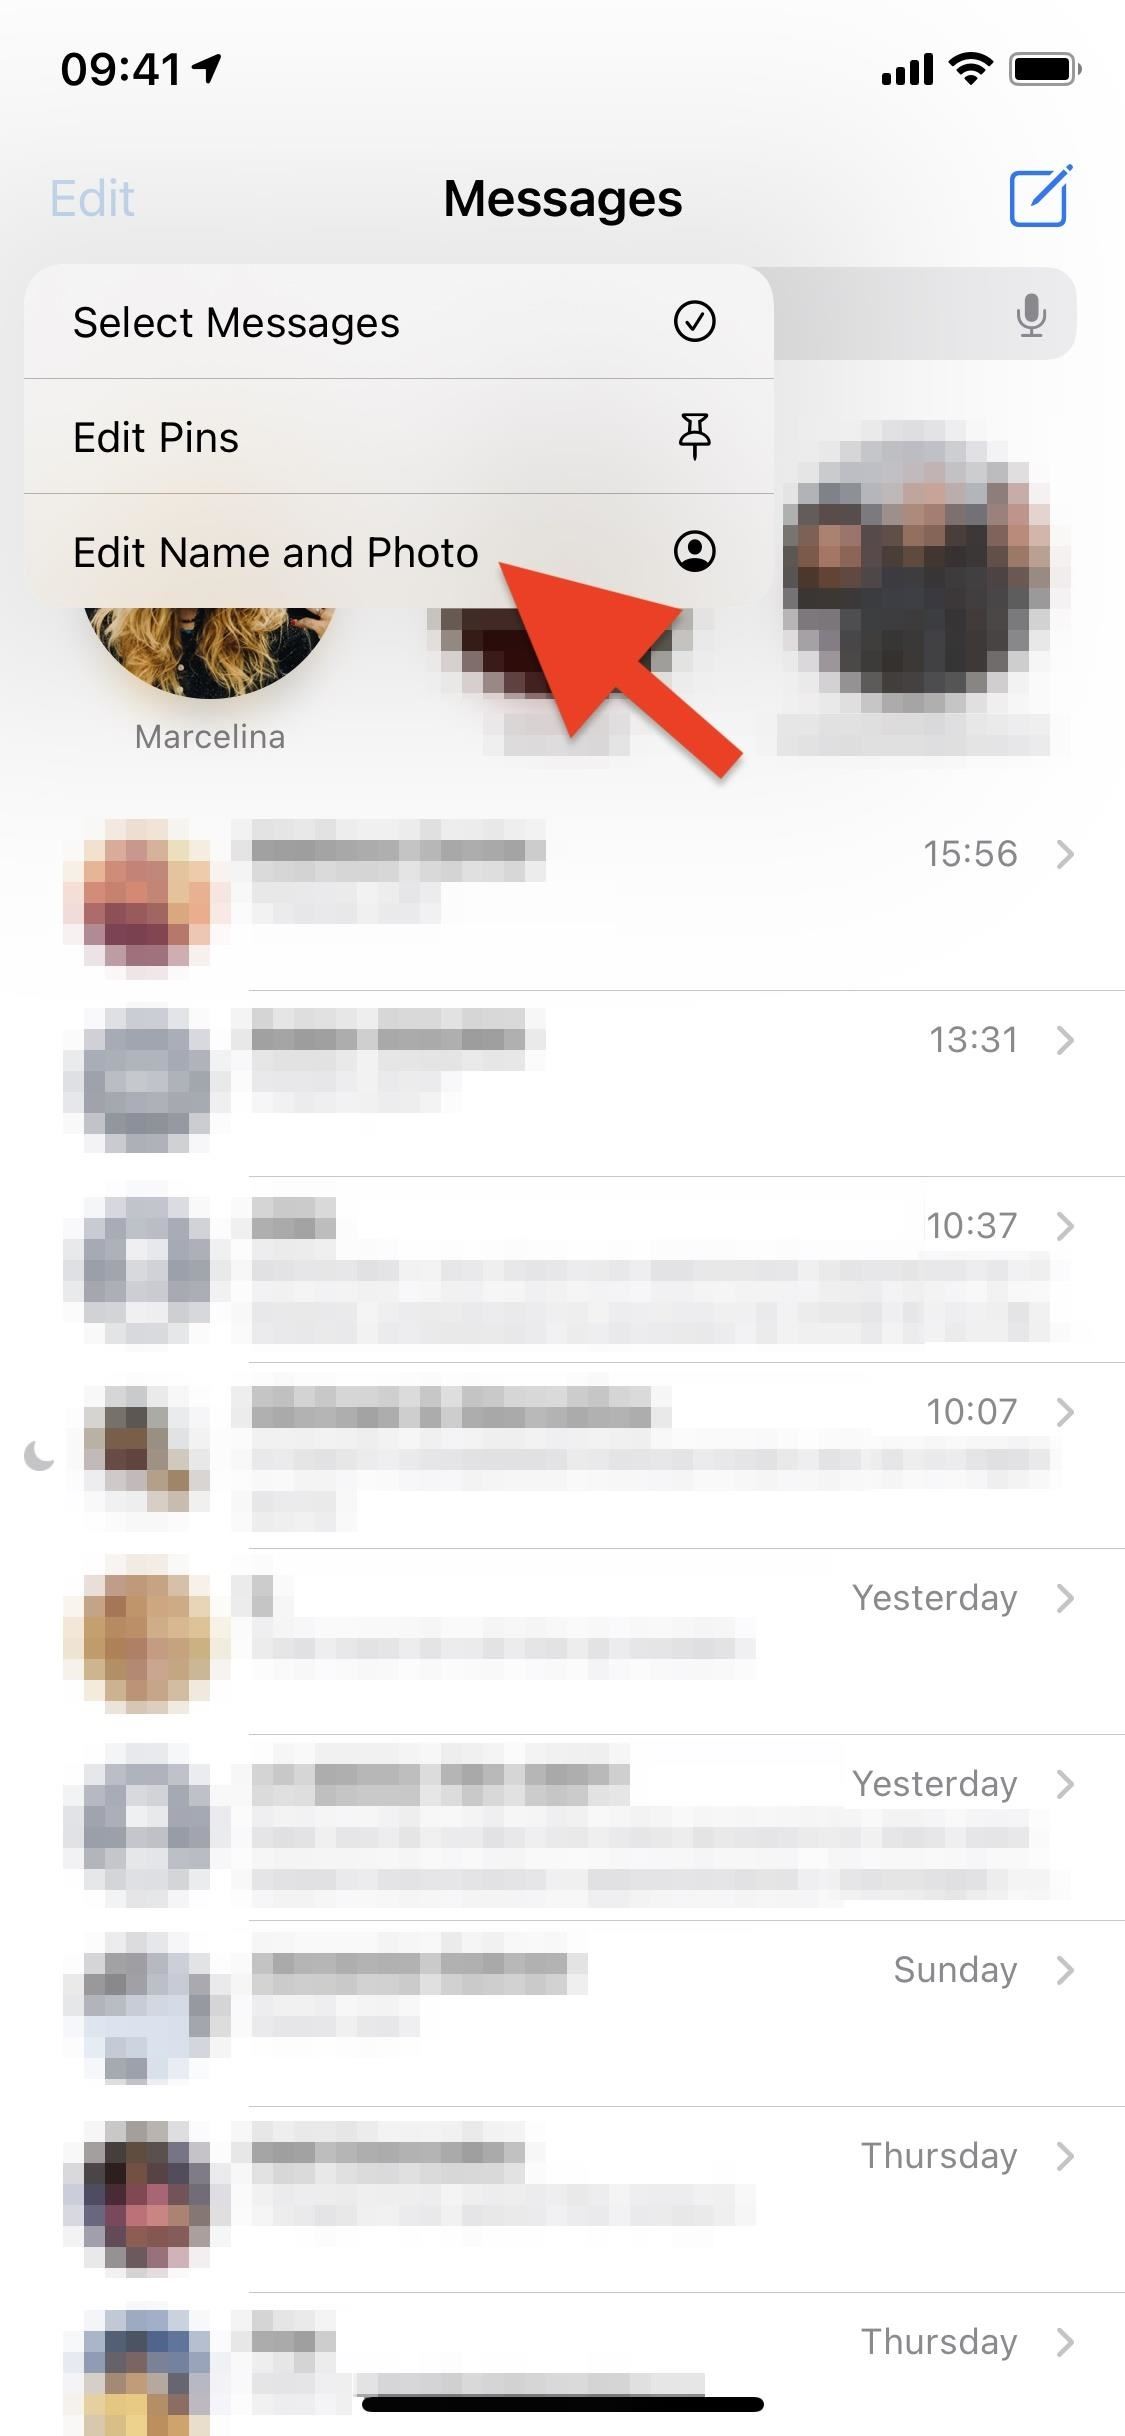 How to Stop Getting Those Annoying 'Share Your Name & Photo' Alerts in iMessage Threads on Your iPhone